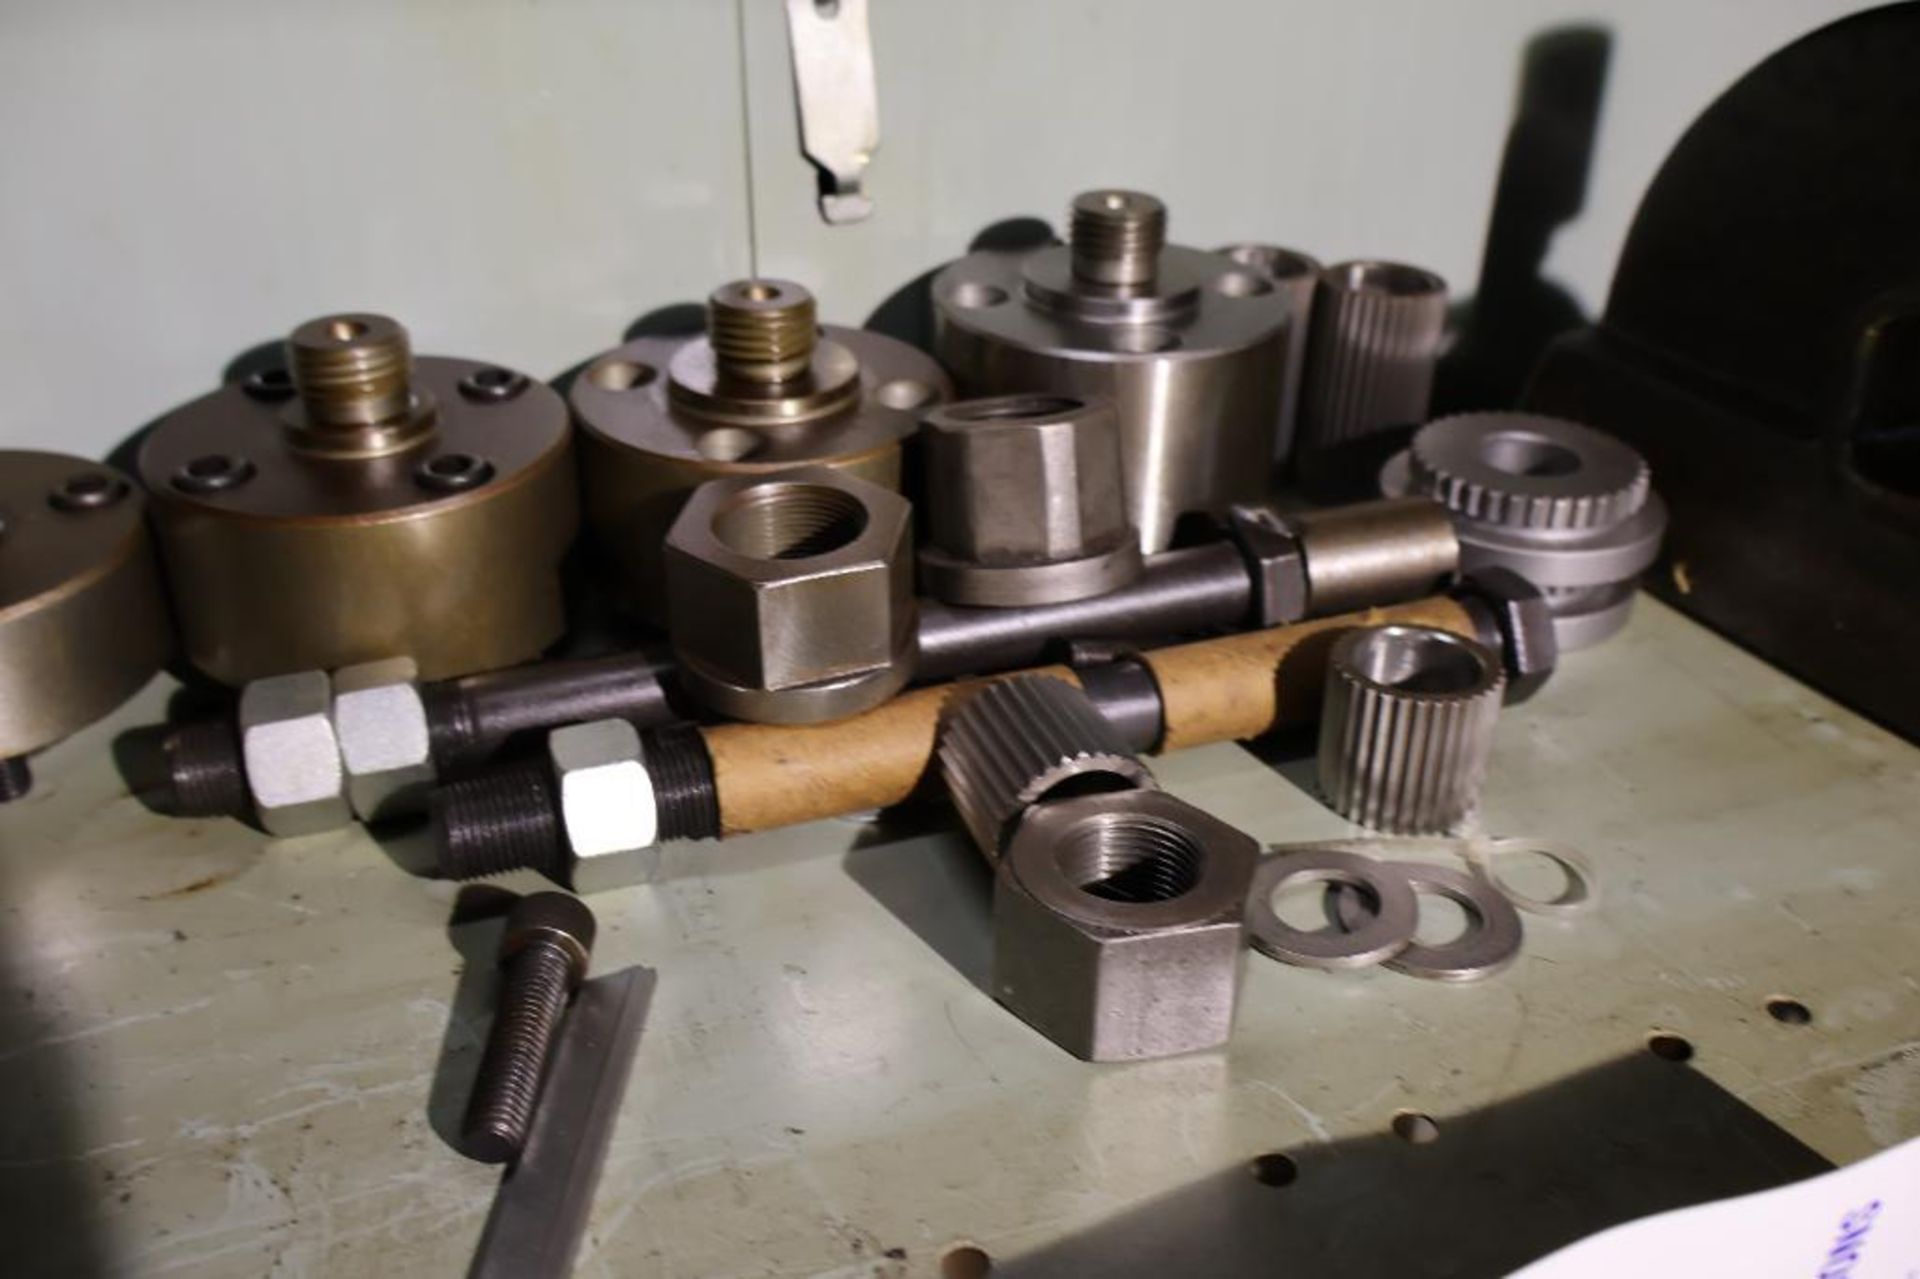 Gear shaper tooling - Image 44 of 79